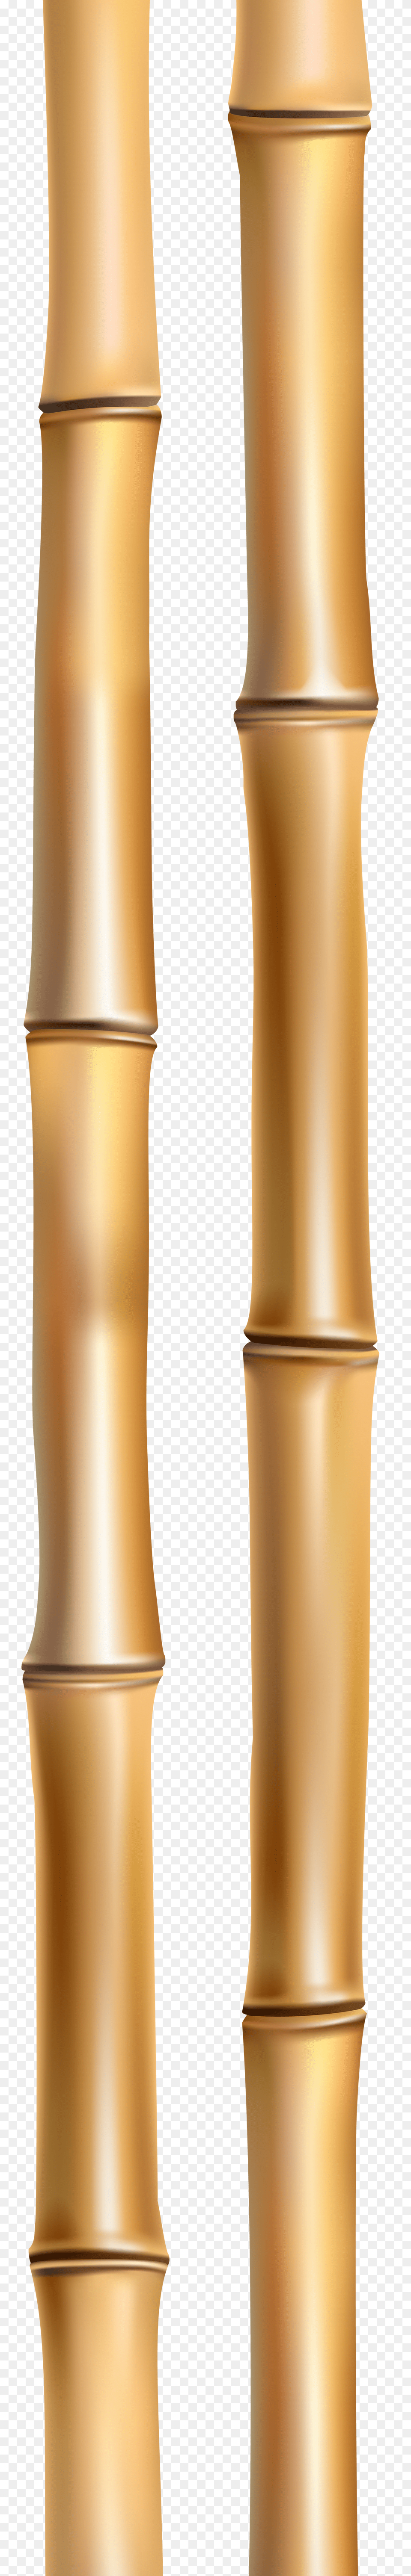 Bamboo, Wood, Gold, Appliance, Device Png Image